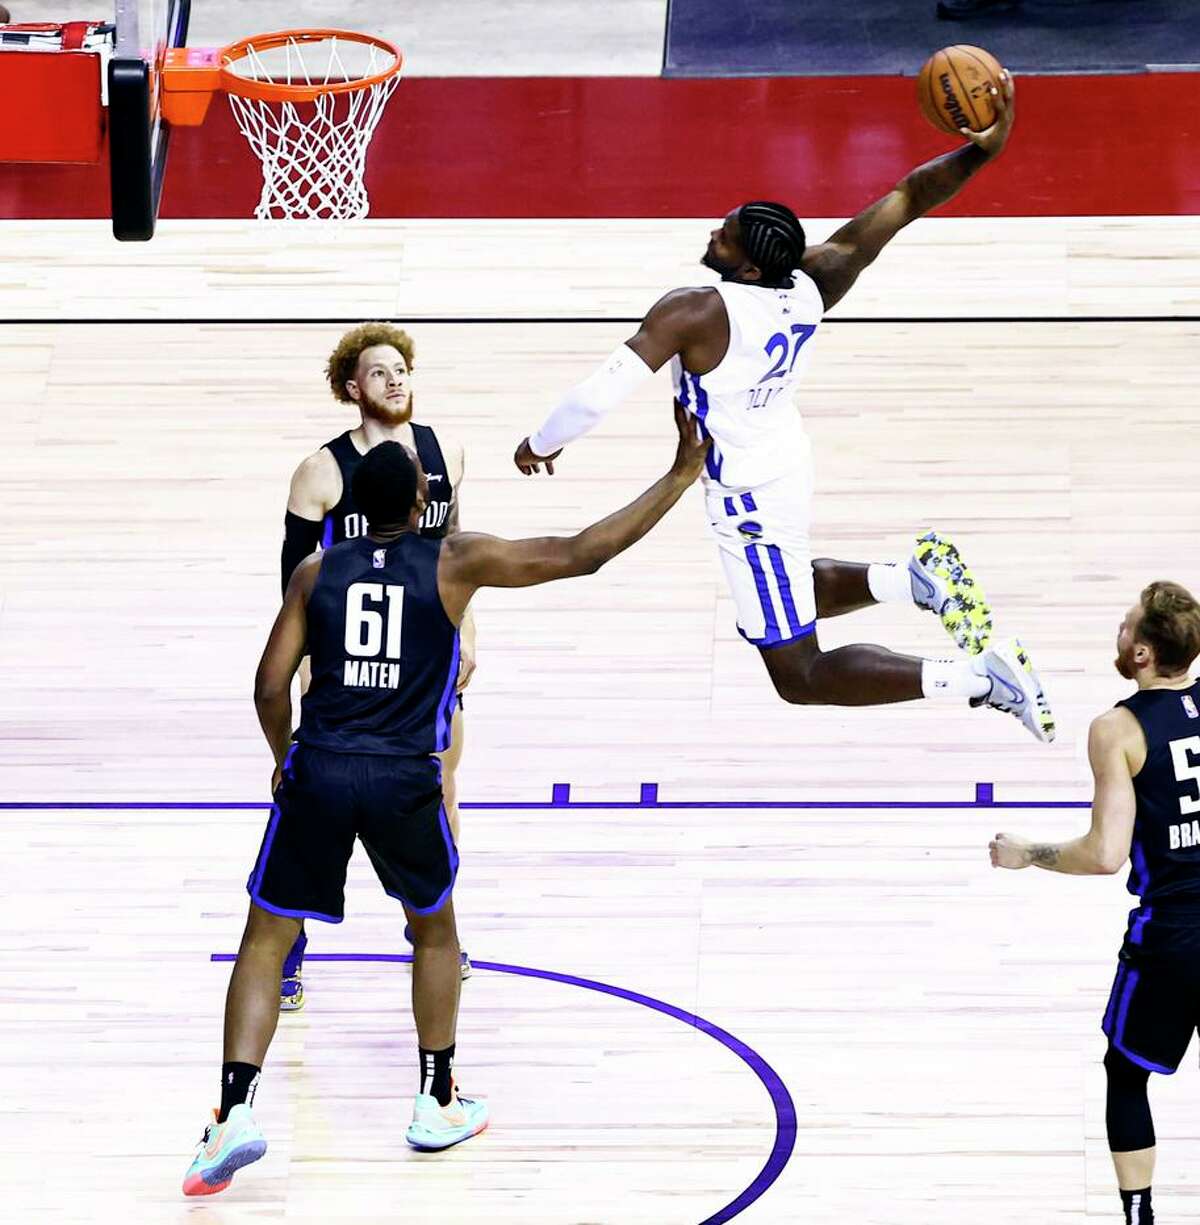 The Warriors’ Cameron Oliver leaps for a dunk against the Orlando Magic’s Yante Maten (61) and Hassani Gravett.